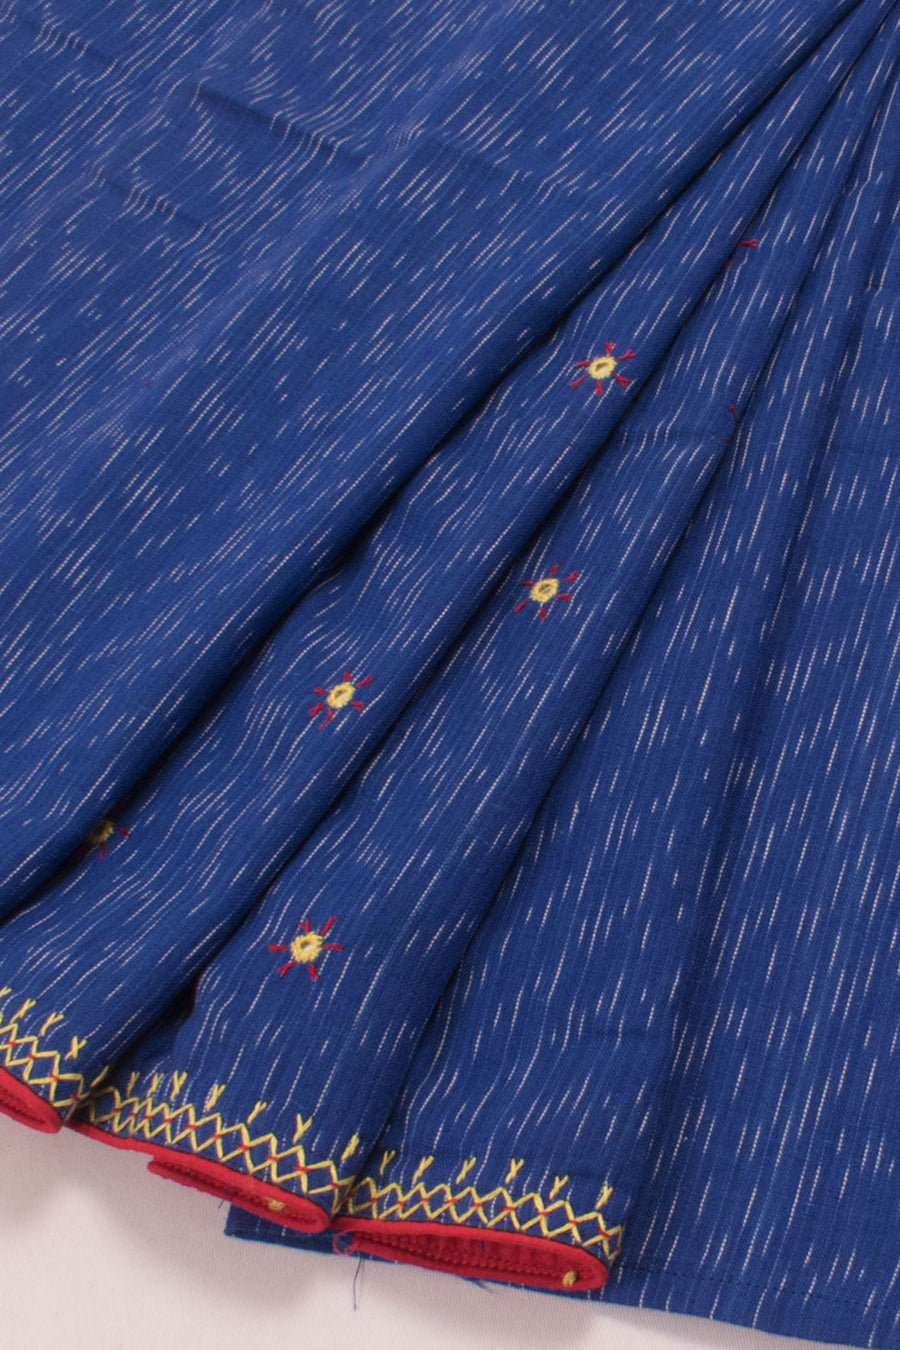 Handloom Pochampally Ikat Cotton 1 m Blouse Material with Mirror Work Embroidery